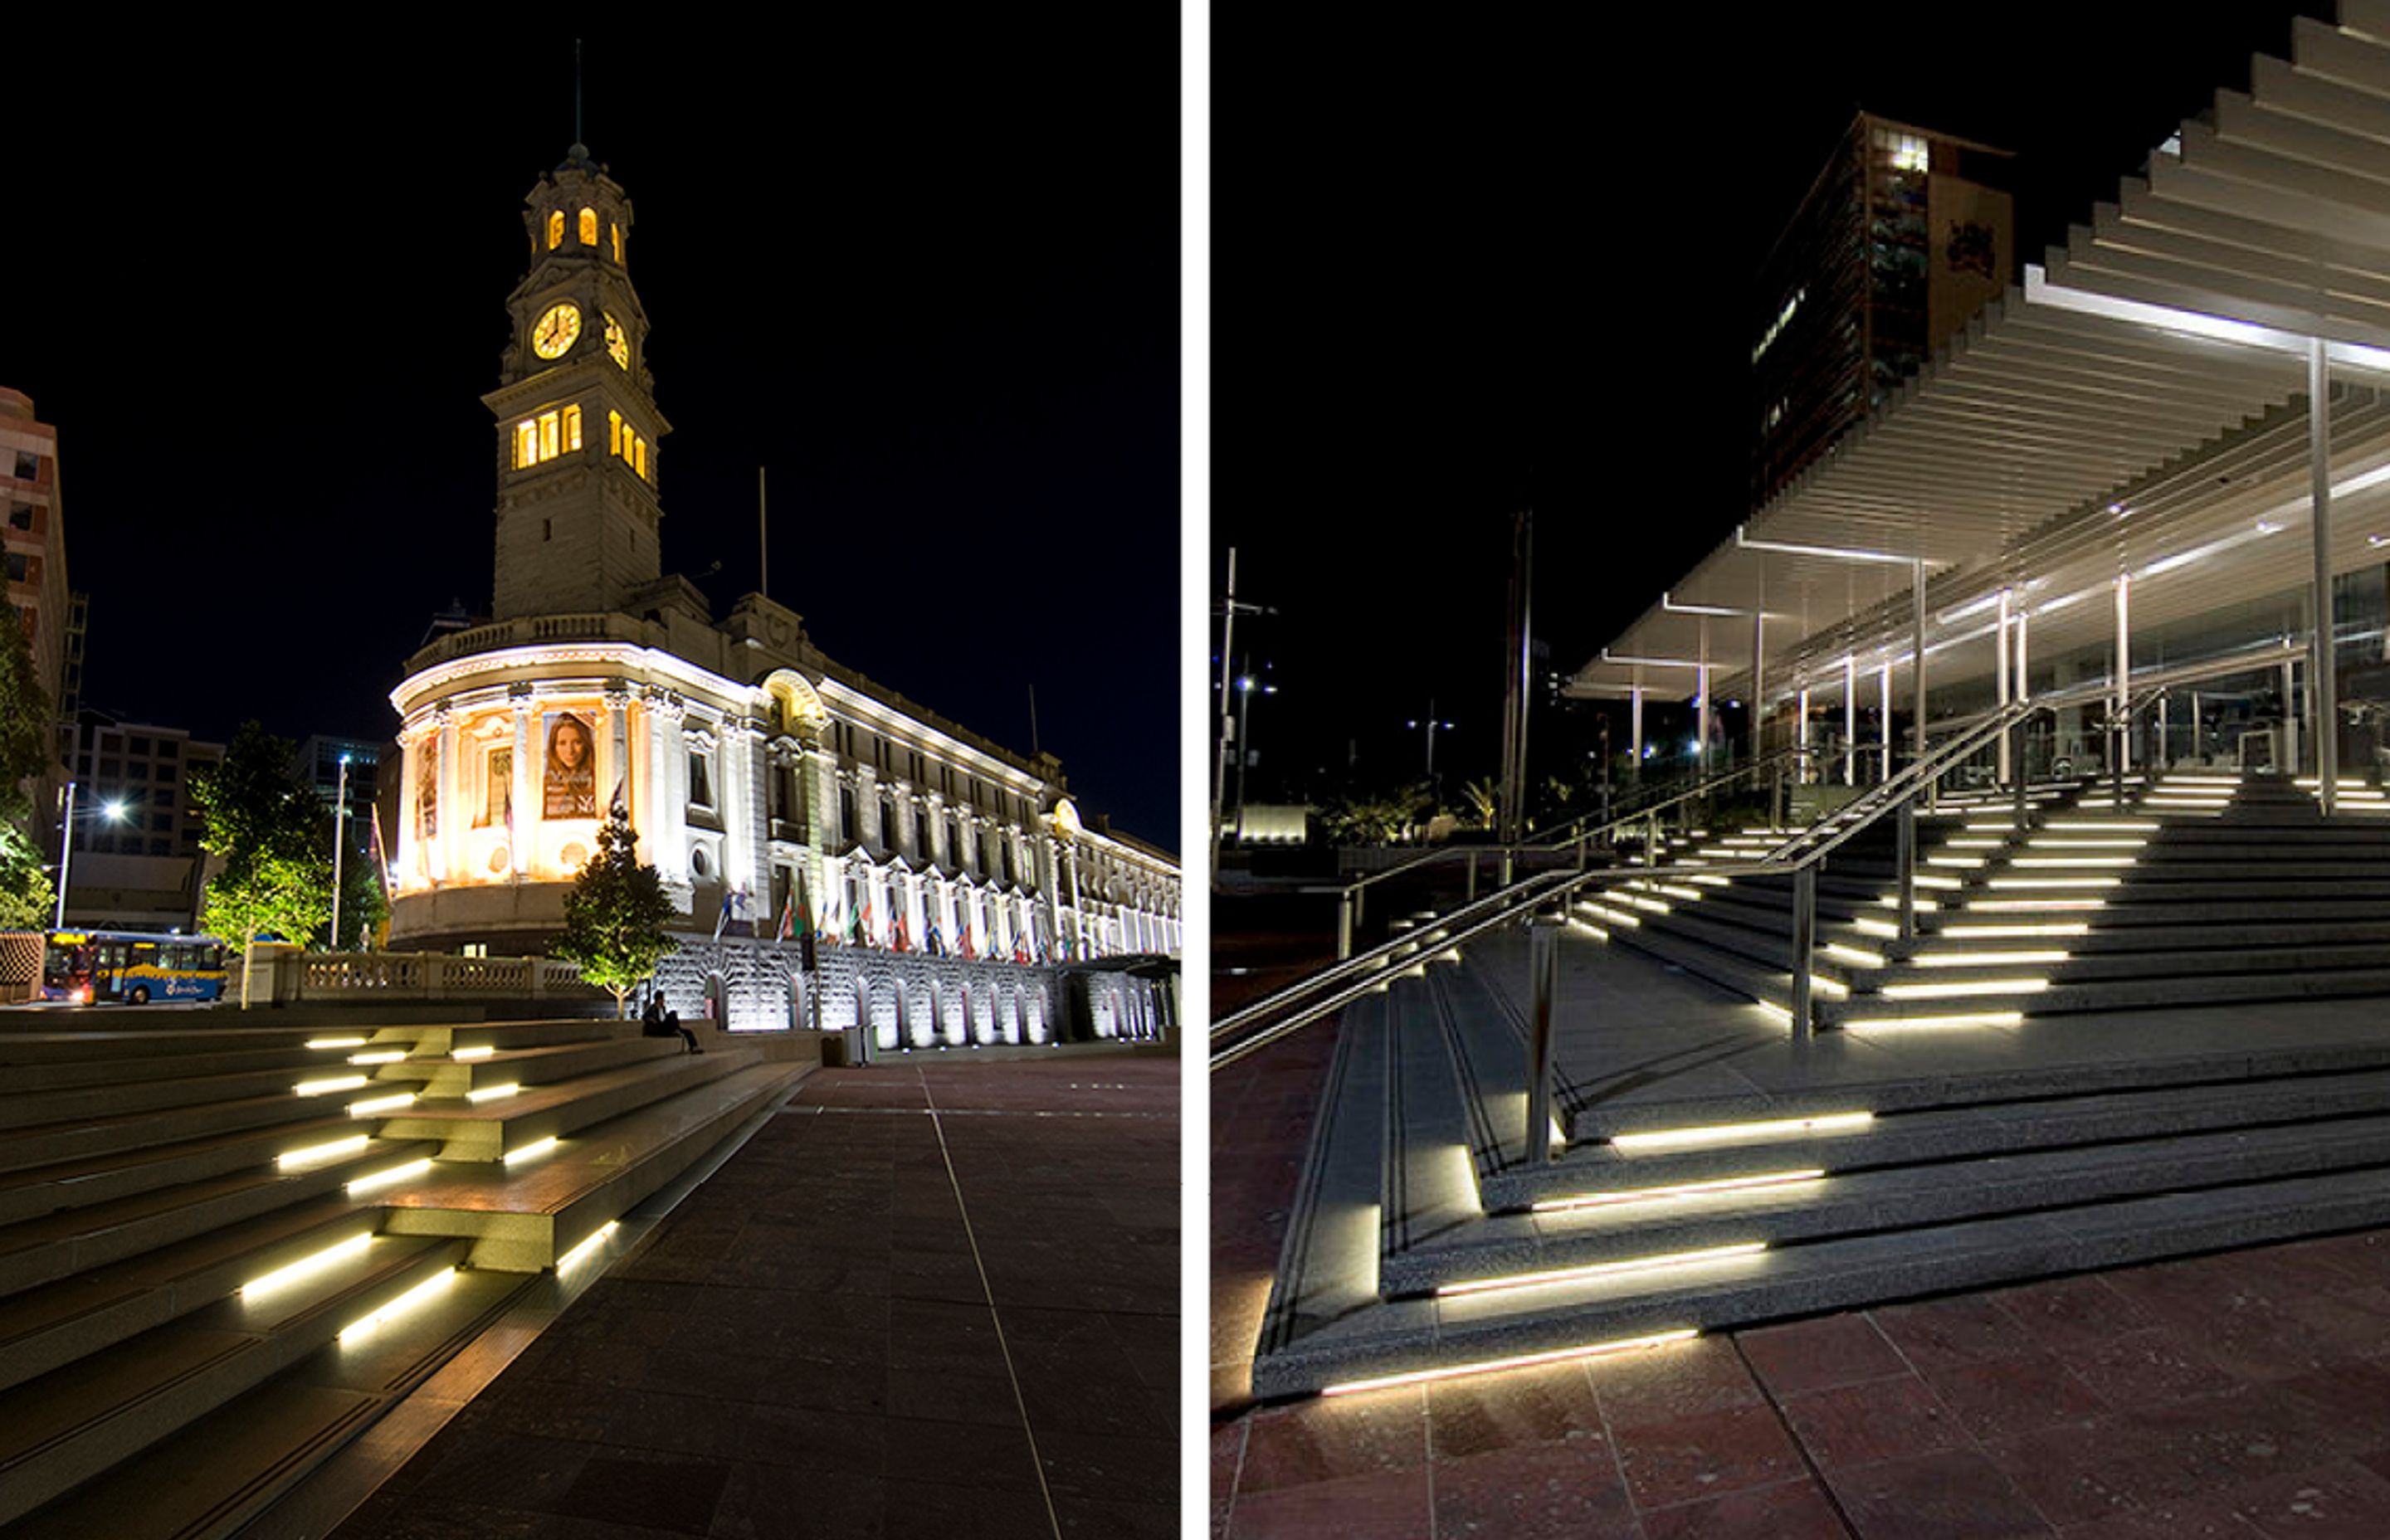 Lighting Solutions excels at large, commercial projects such as this lighting design for Auckland's Aotea Square.